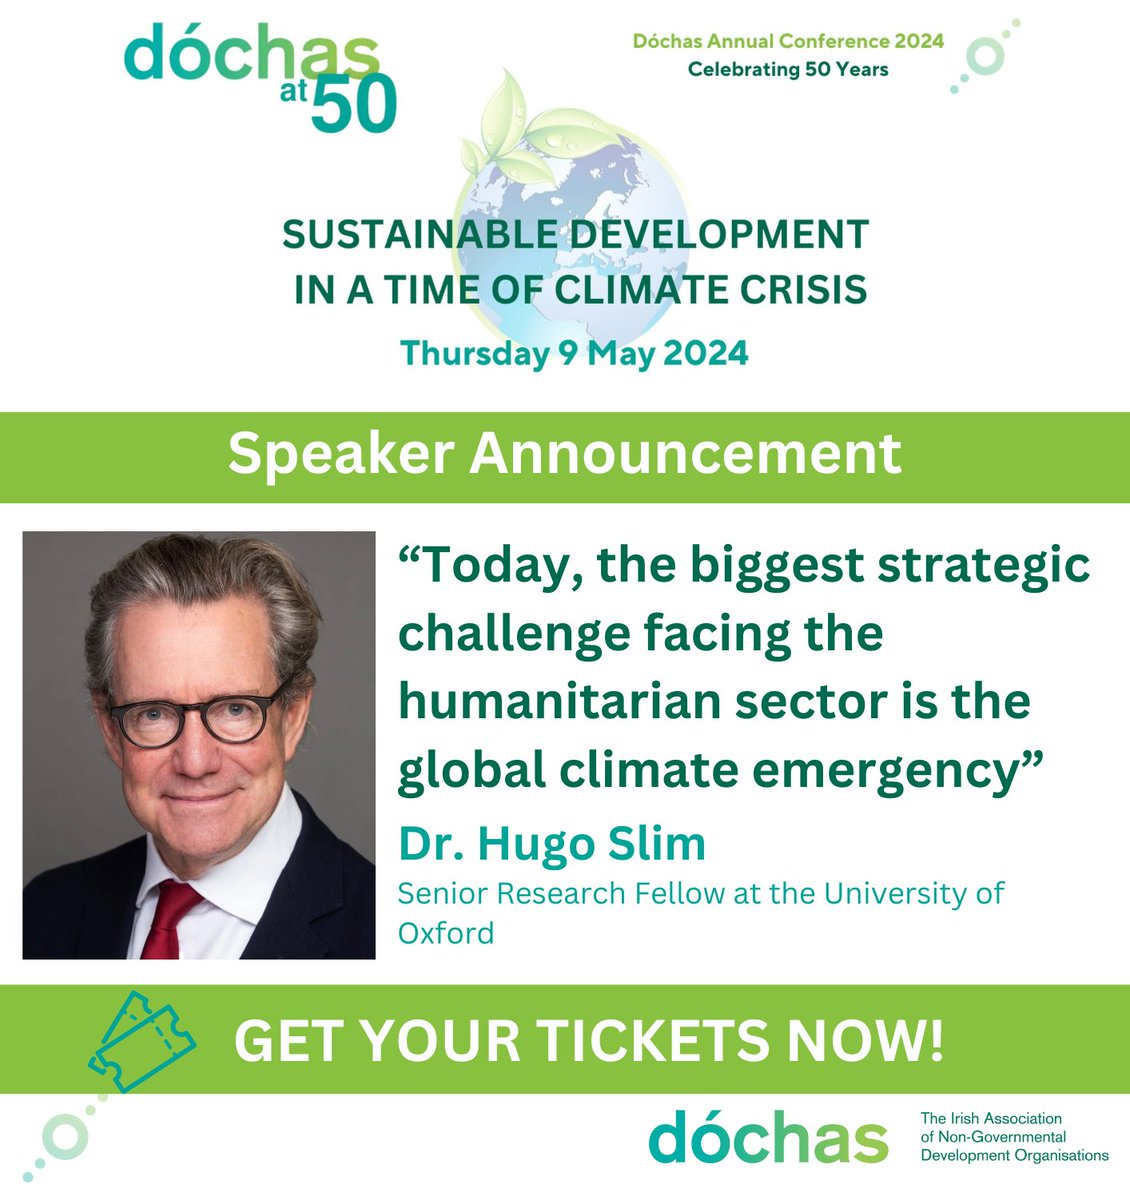 Dive into the compelling insights of Hugo Slim @HSlim_Oxford by reading his recent article on the impact of climate emergencies on humanitarian action. gppi.net/2023/06/28/hum… To hear more on this, join us at the upcoming Dóchas Conference on May 9th. dochas.ie/dochas-confere…